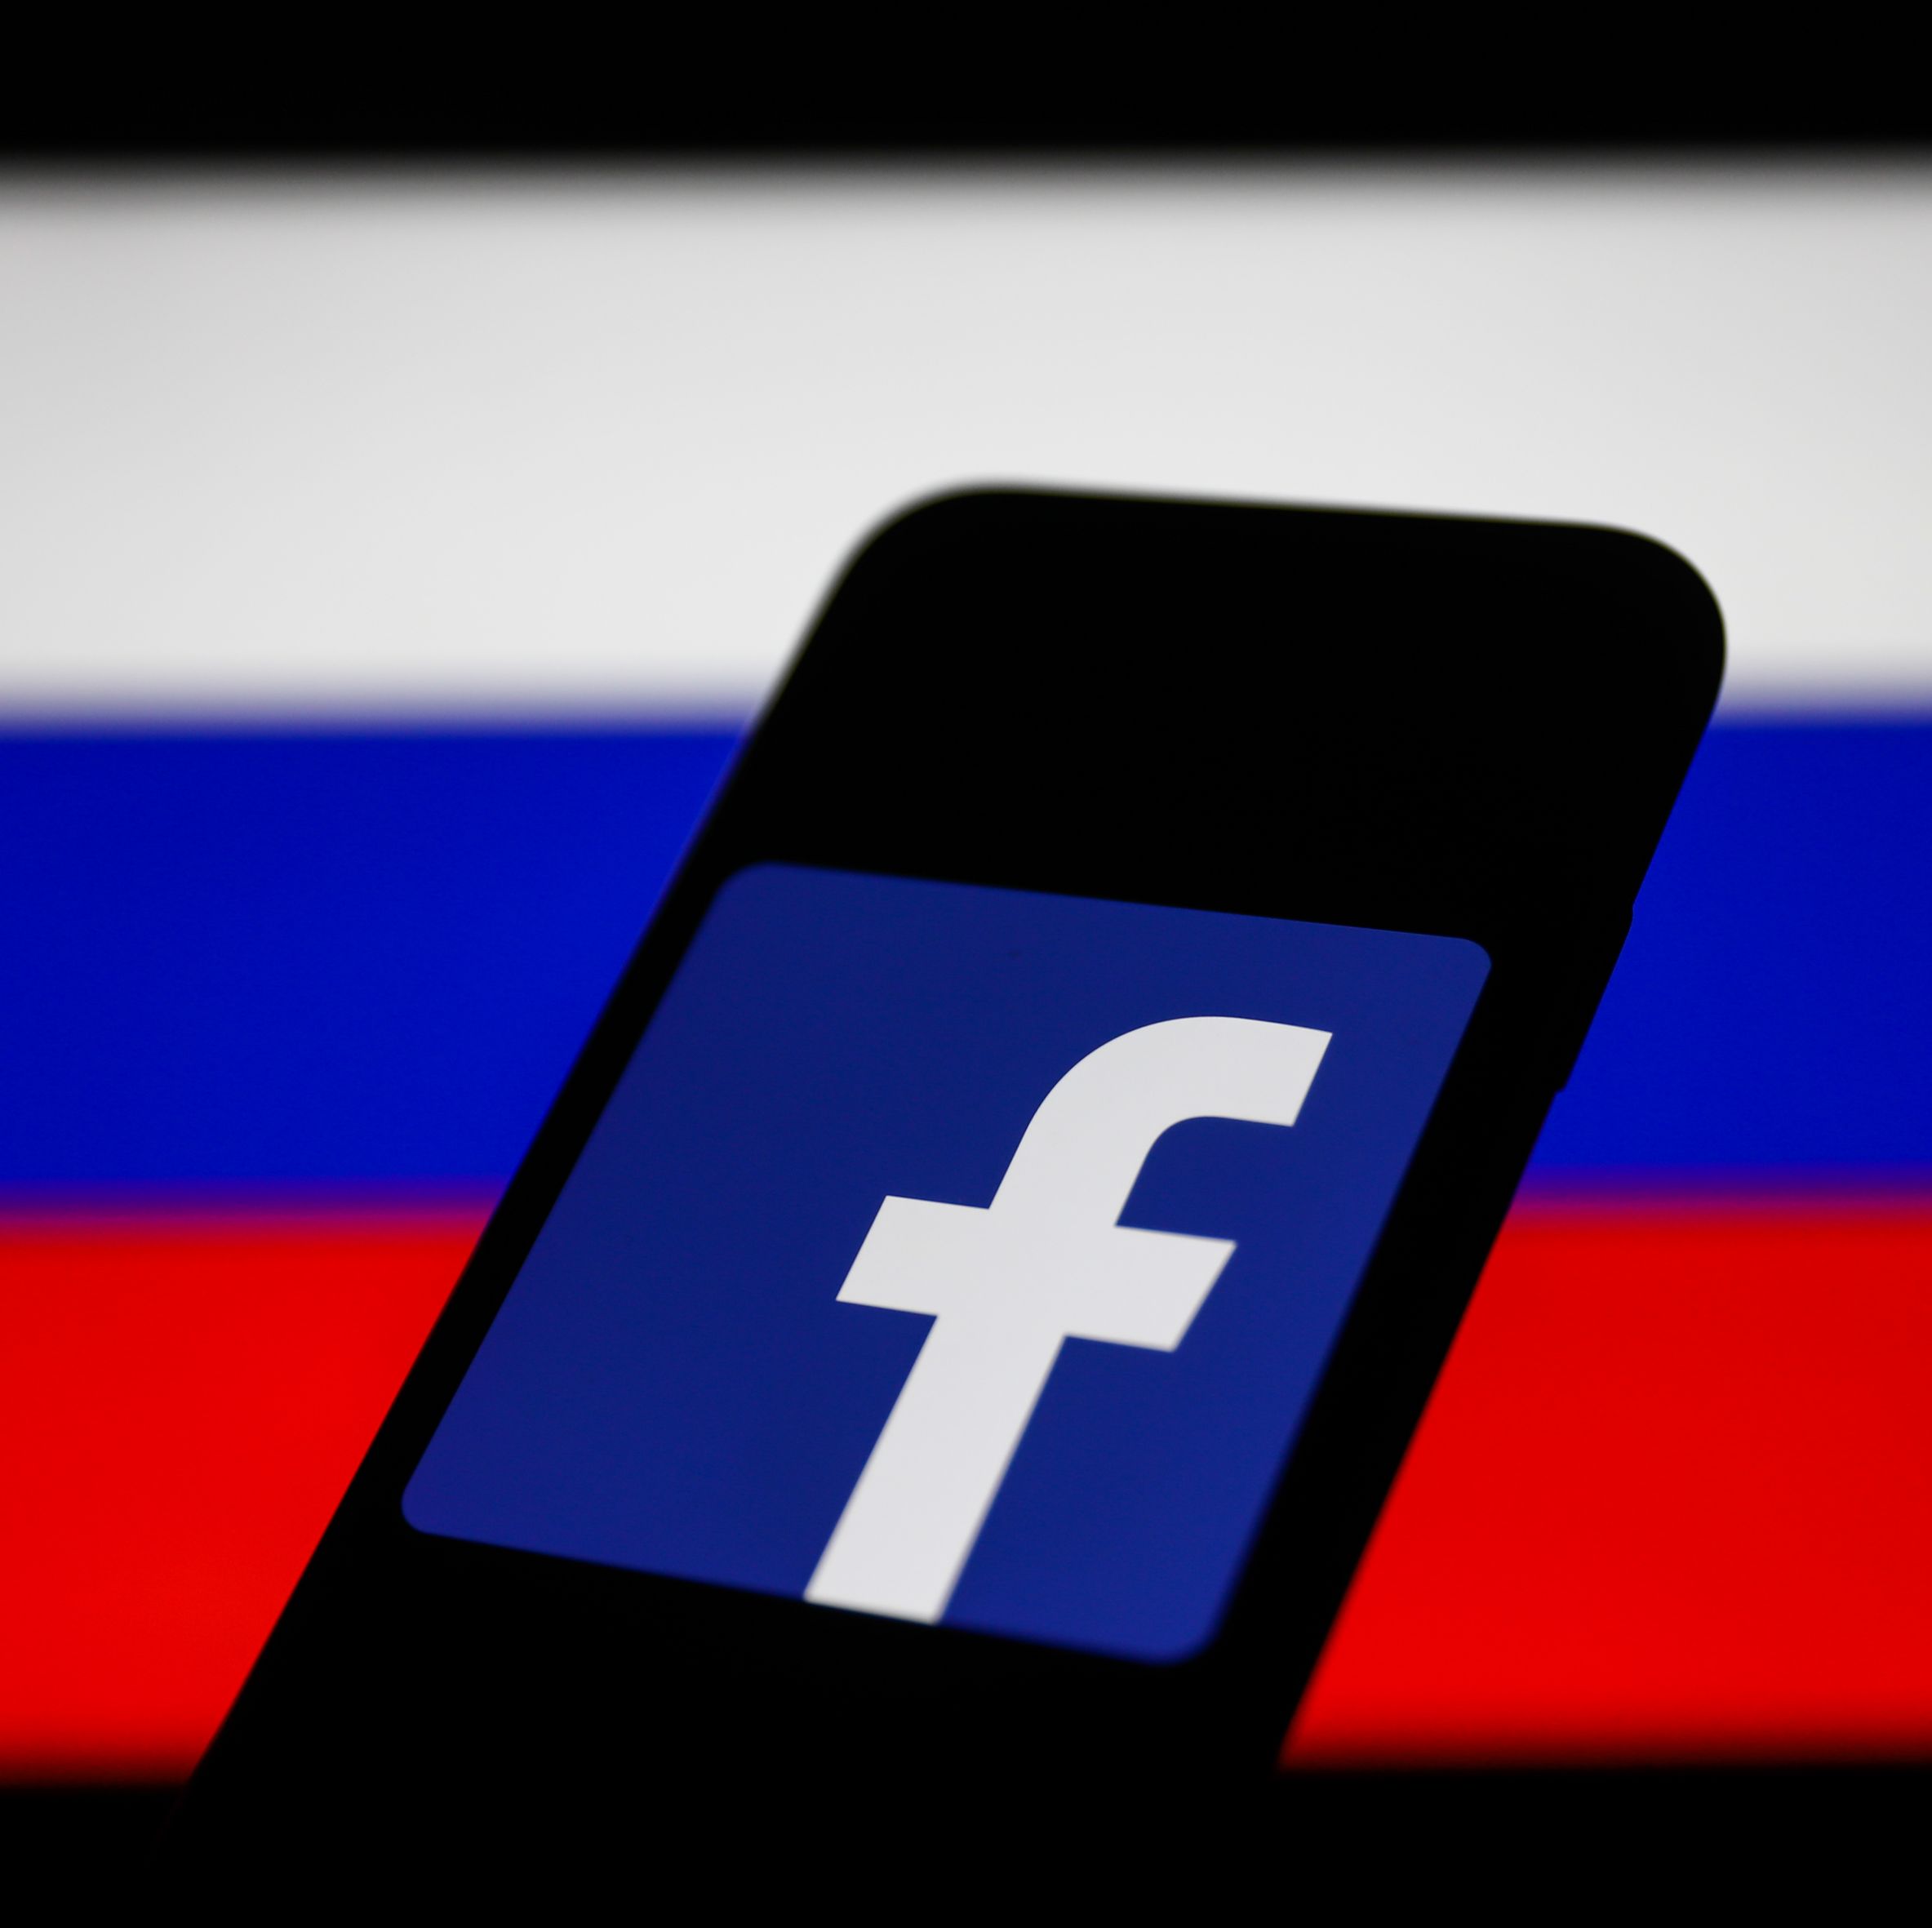 Russia Just Blocked Facebook. Here's What Citizens Can Do About It